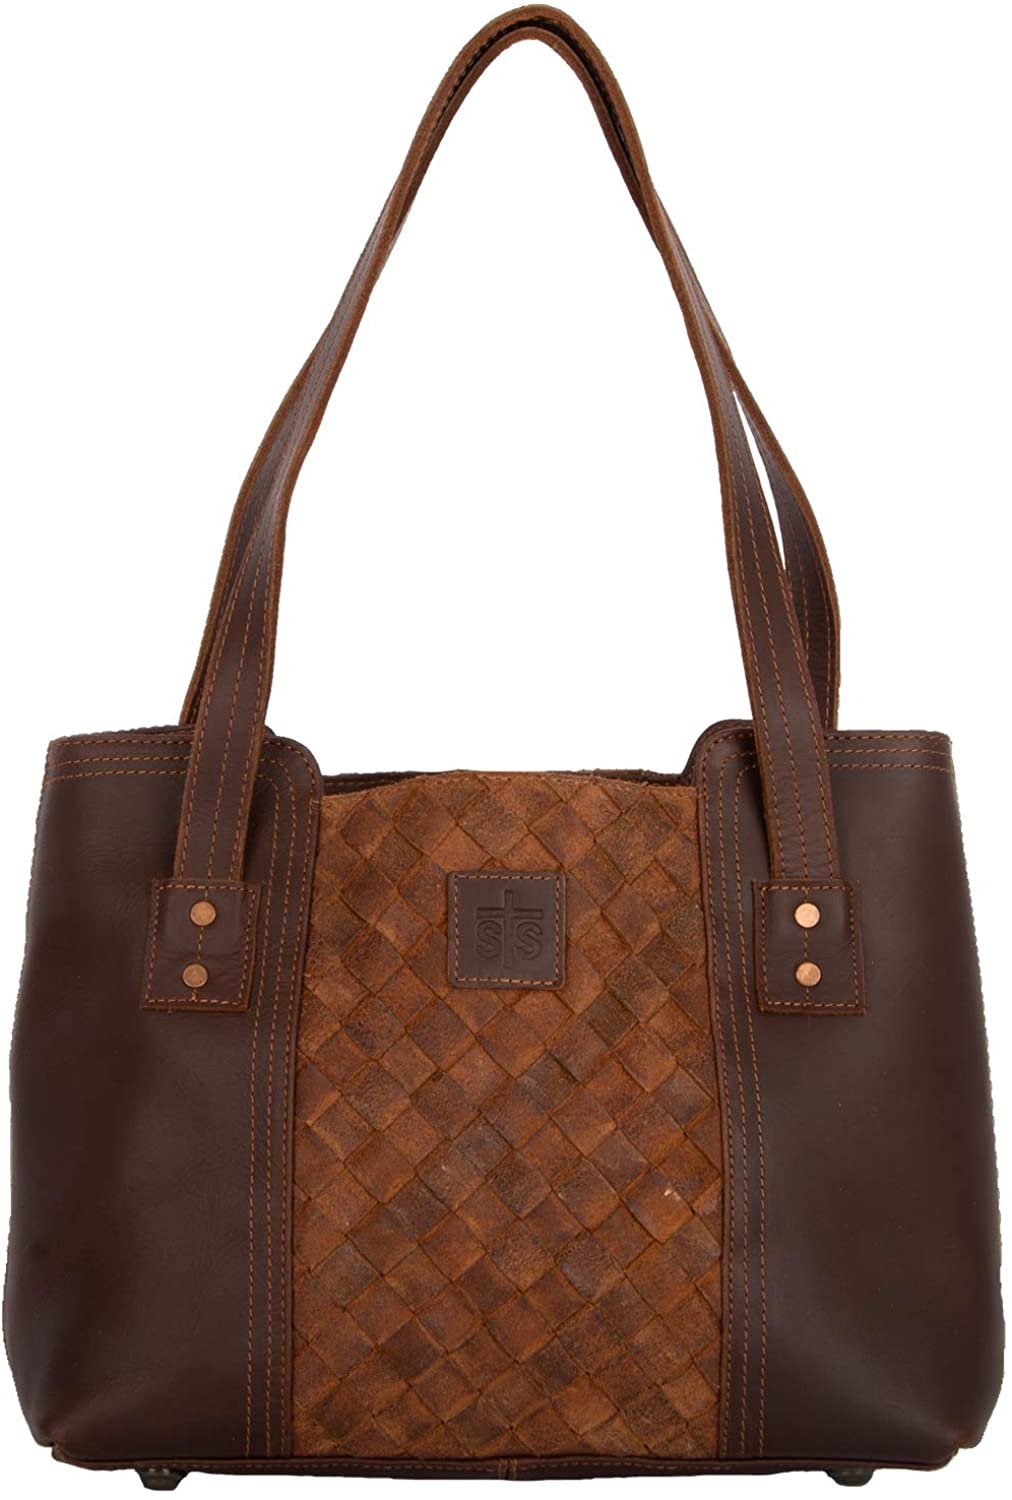 Sts Ranchwear Basket Weave Small Tote Brown One Size --|-- 734